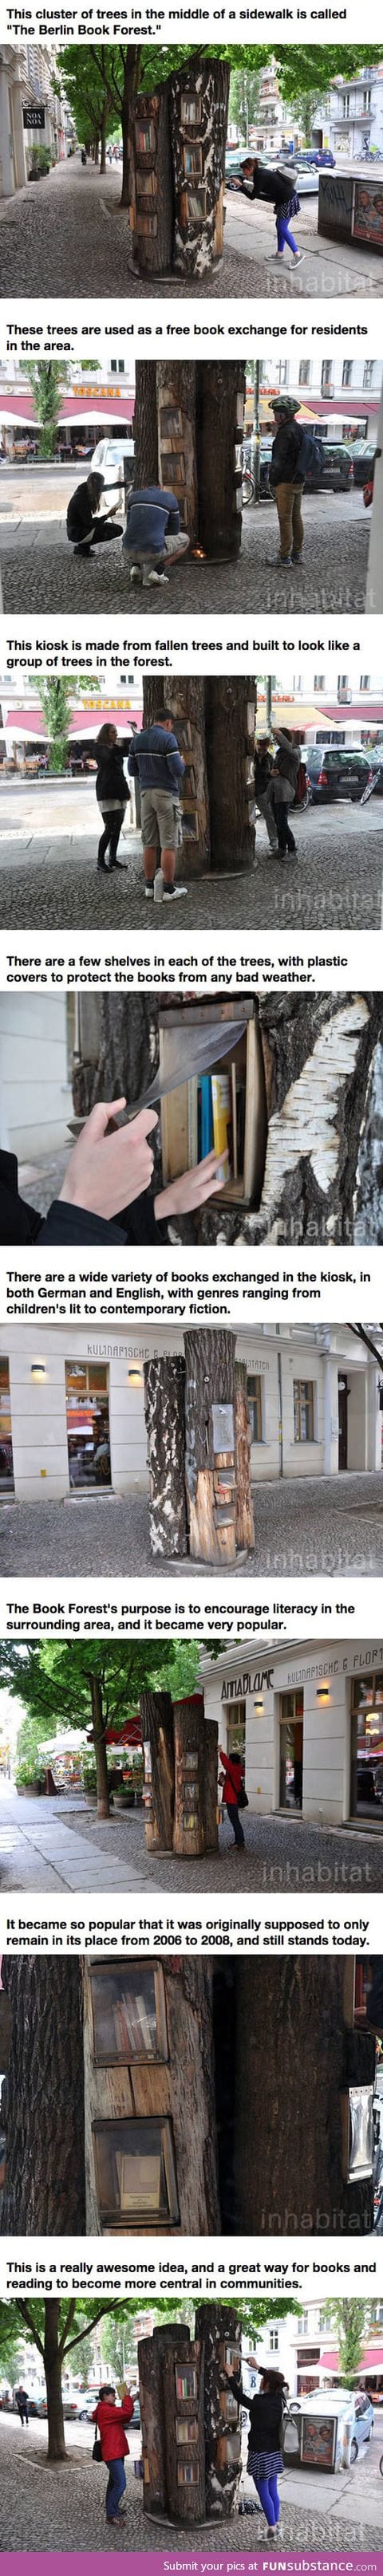 The book forest in Berlin